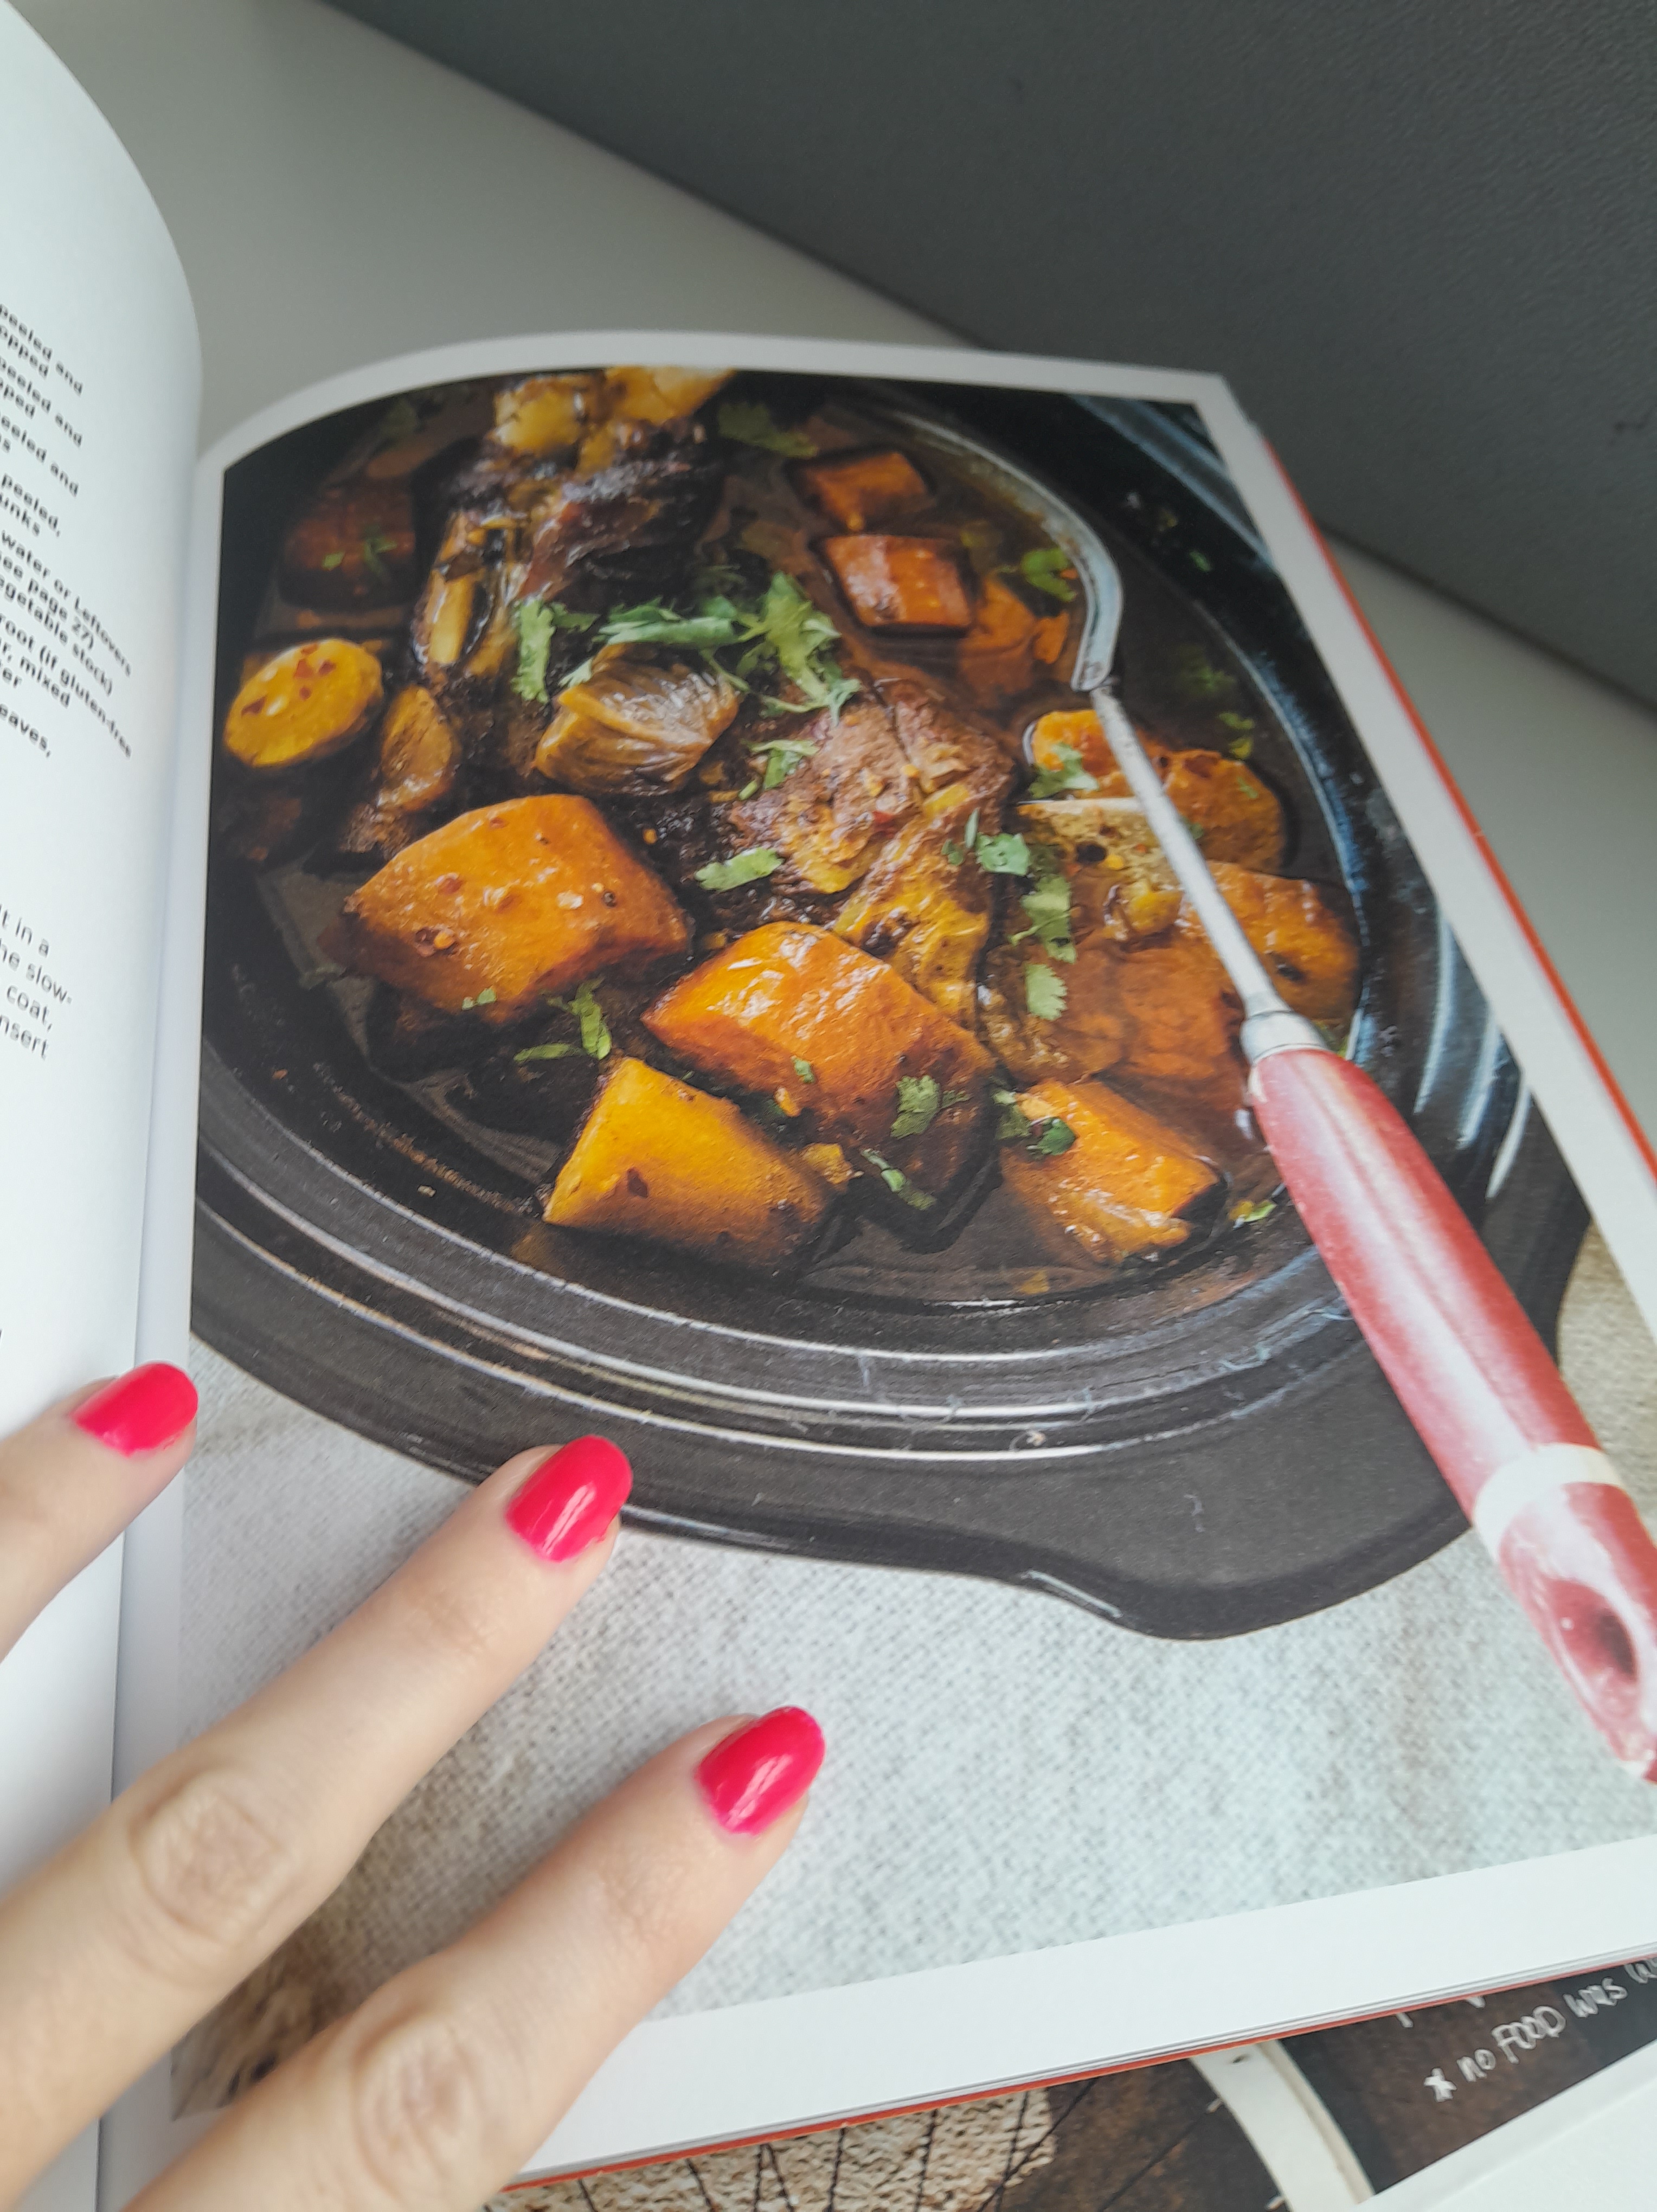 I quit sugar - Slow cooker cookbook by sarah wilson - Book review